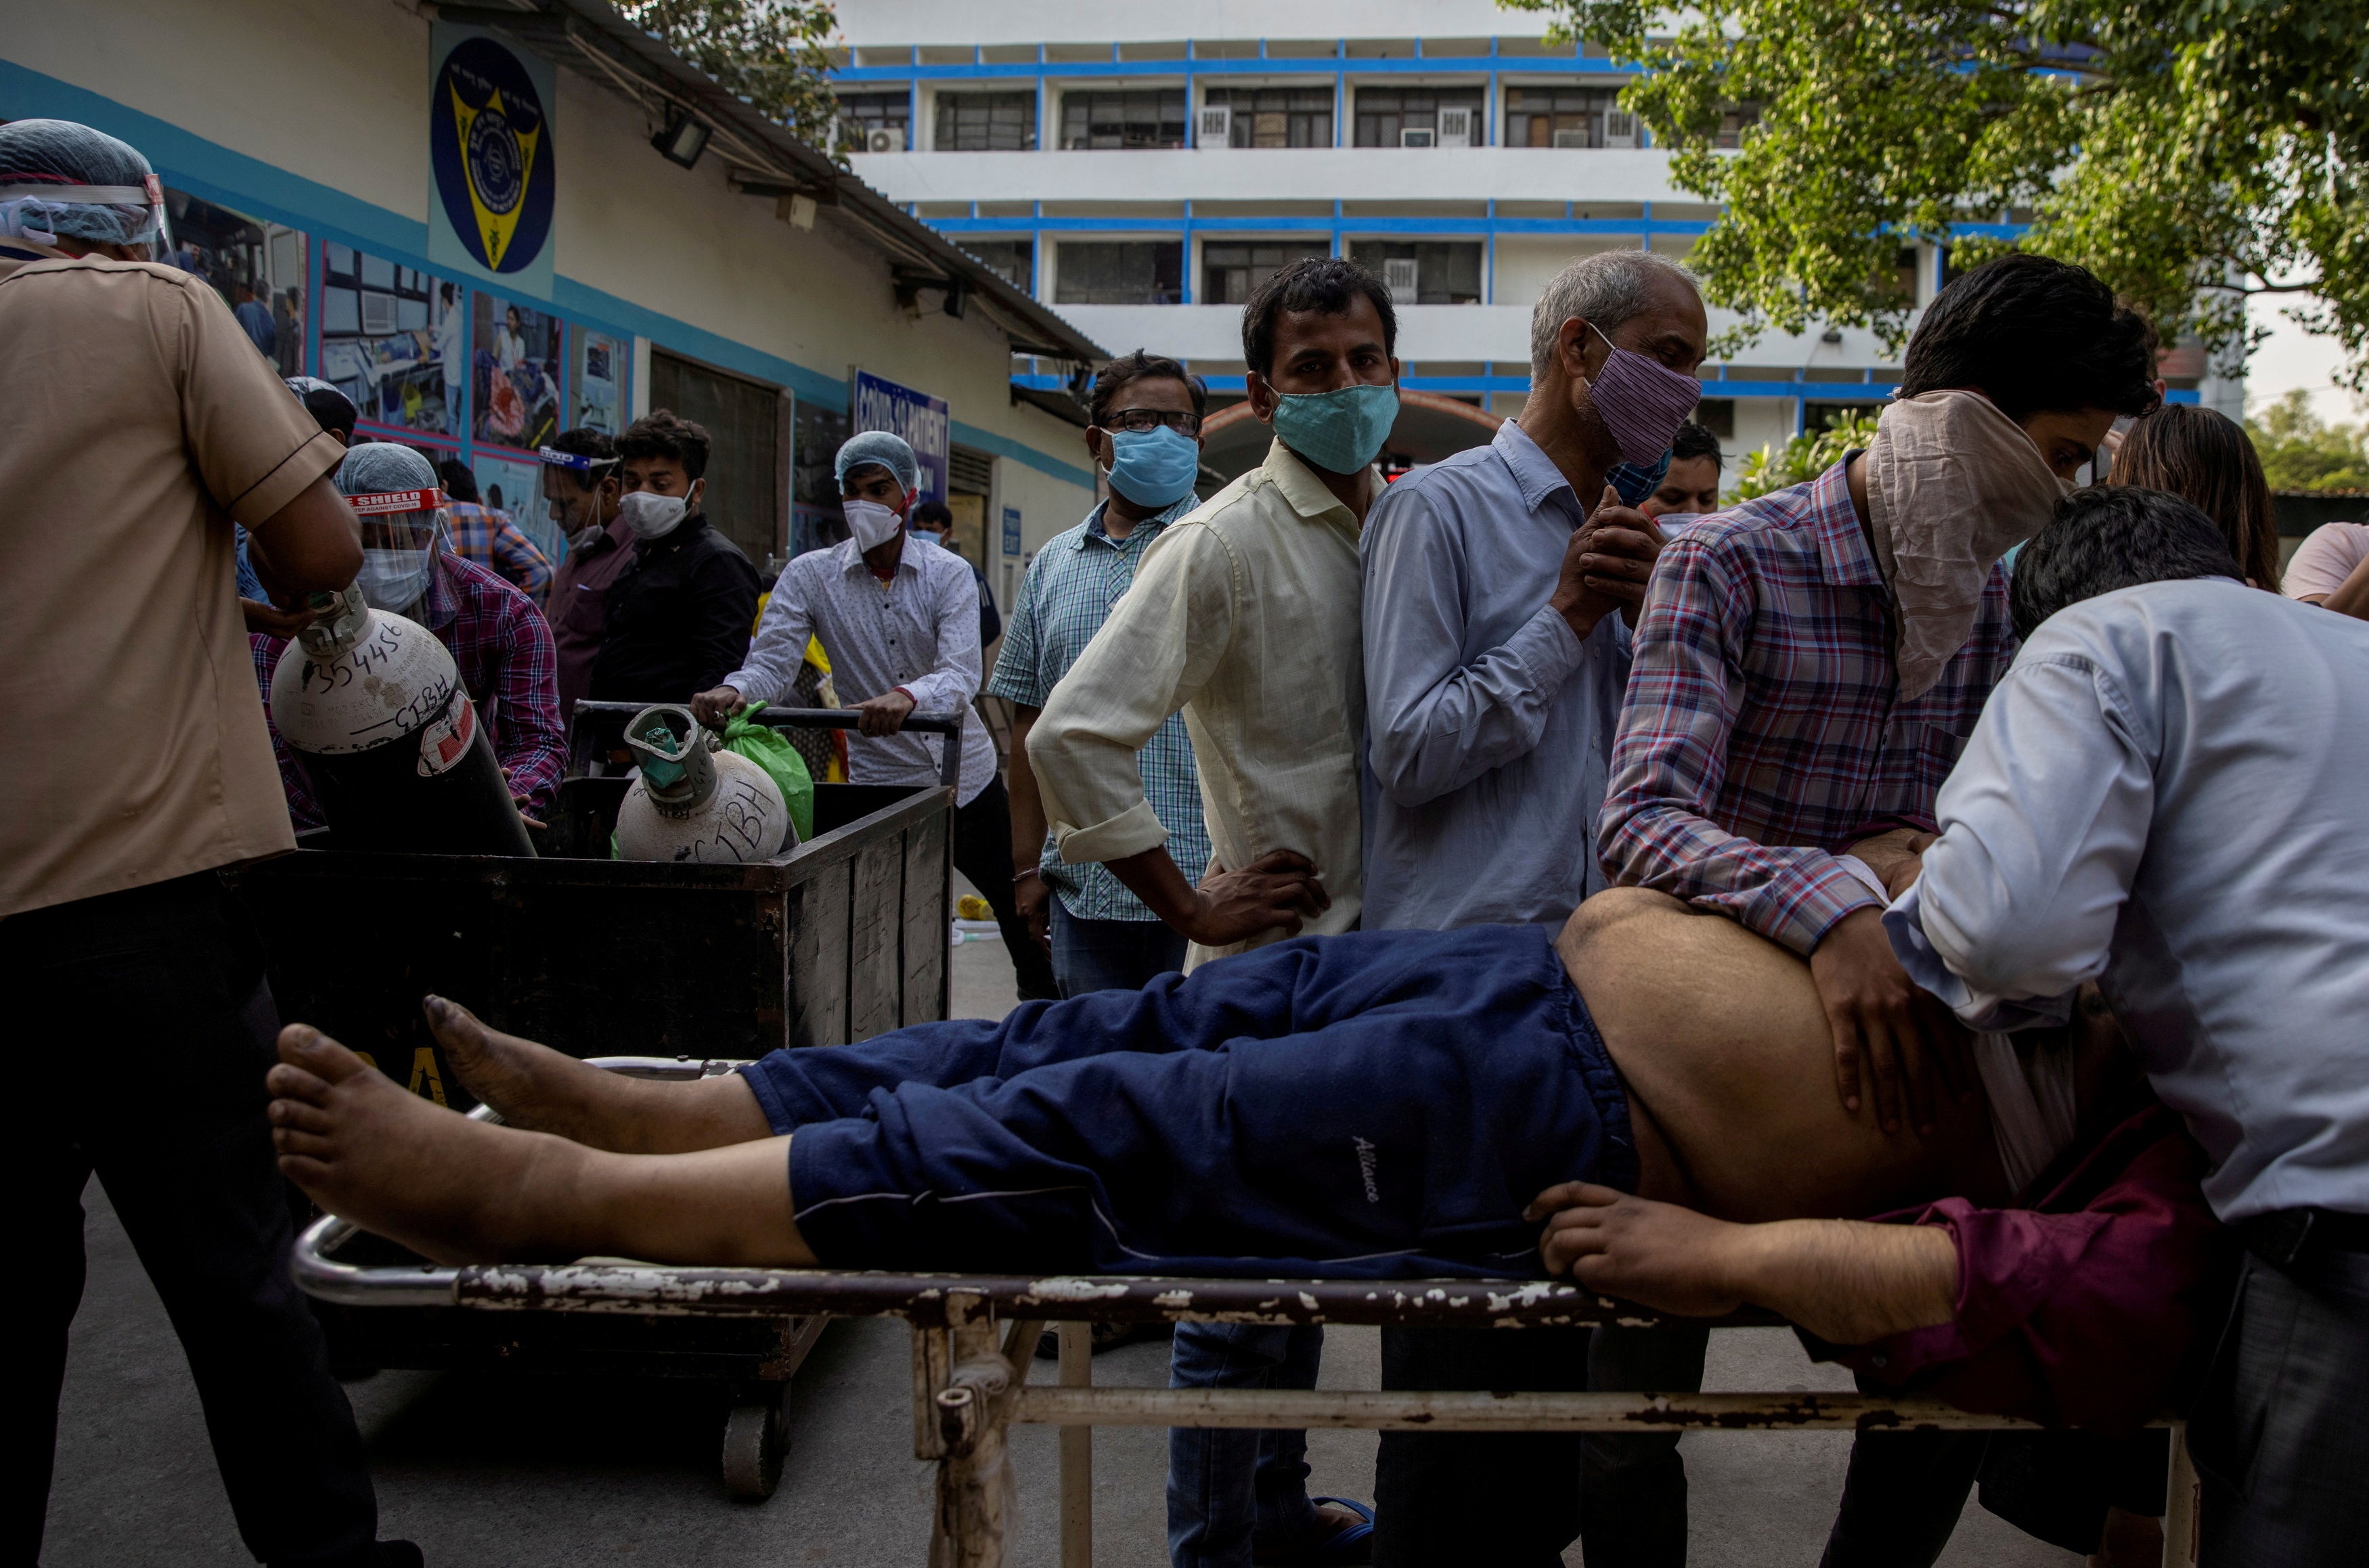 SENSITIVE MATERIAL. THIS IMAGE MAY OFFEND OR DISTURB   Family members mourn after Shayam Narayan is declared dead outside the coronavirus disease (COVID-19) casualty ward, at Guru Teg Bahadur hospital, amidst the spread of the disease in New Delhi, India, April 23, 2021. REUTERS/Danish Siddiqui